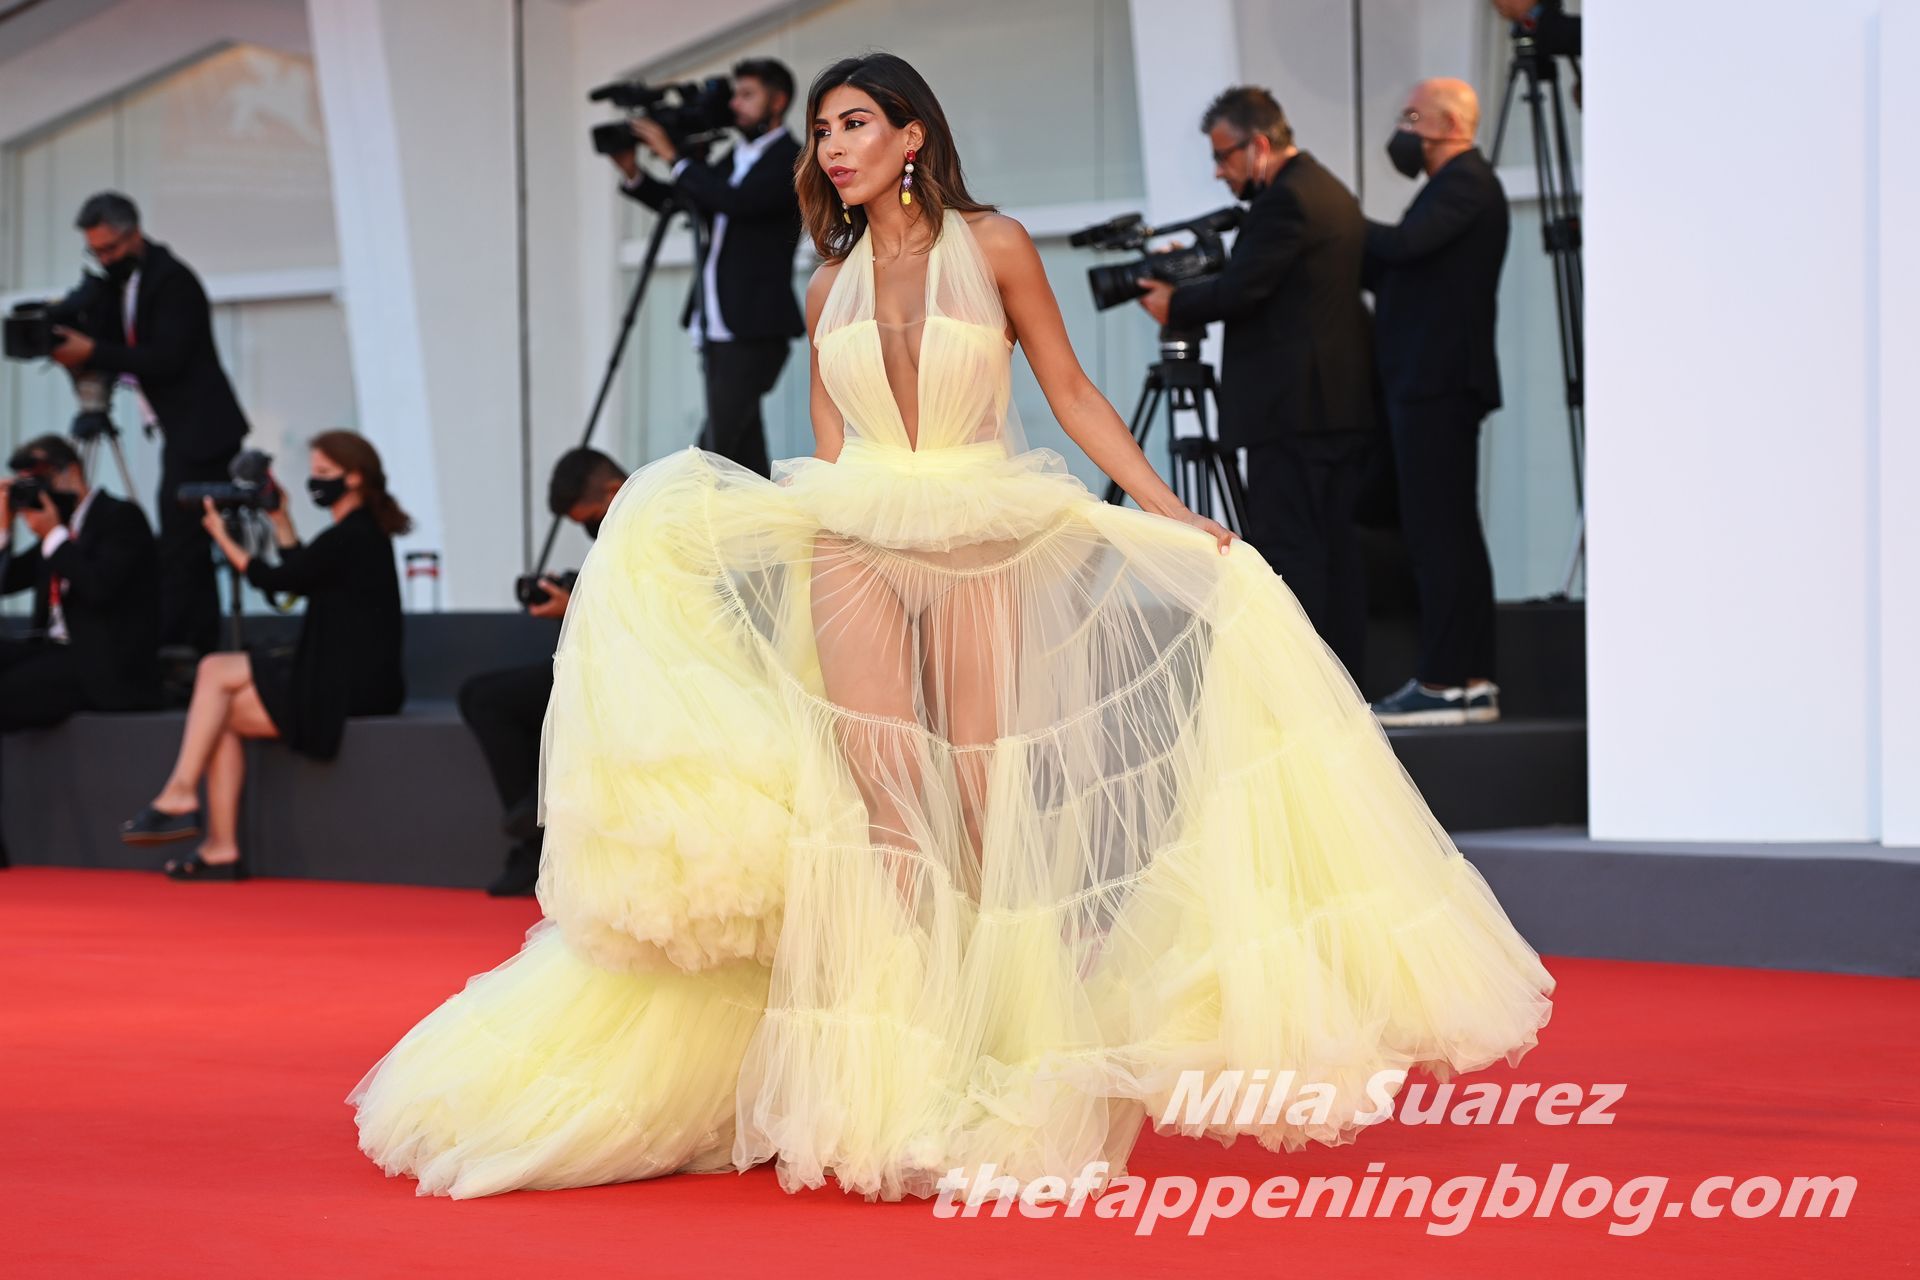 Mila Suarez Flaunts Her Tits and Underwear on the Red Carpet (14 Photos)